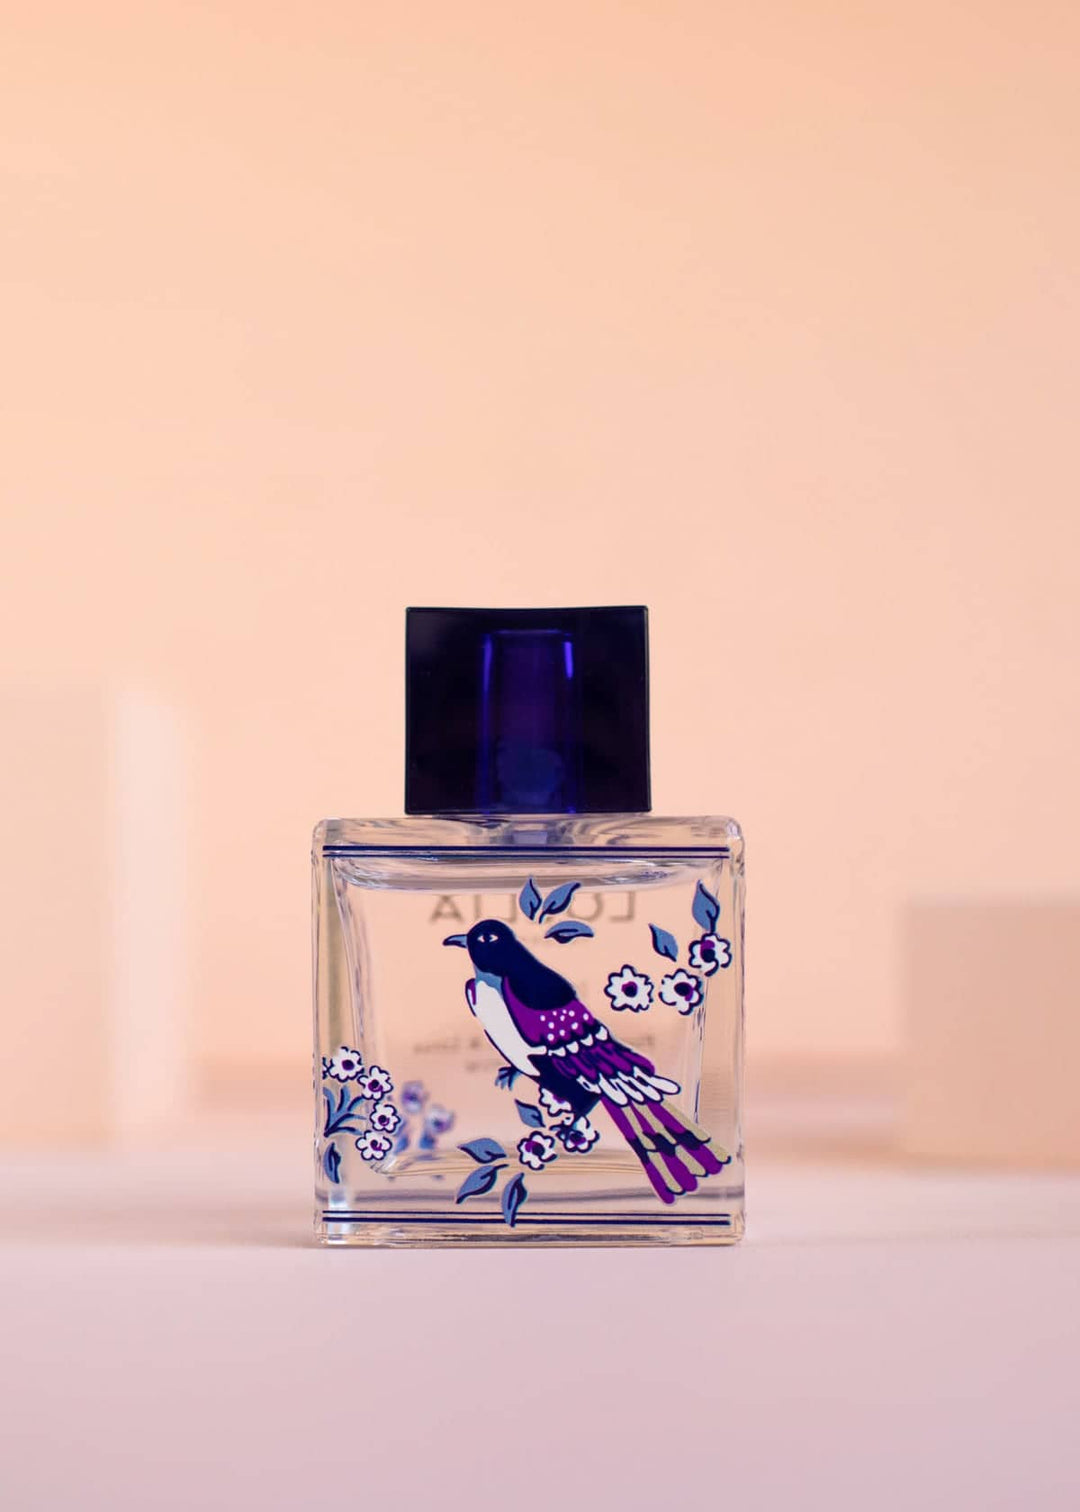 Inspired by Imagination Perfume - Imagine - The Fragrance World